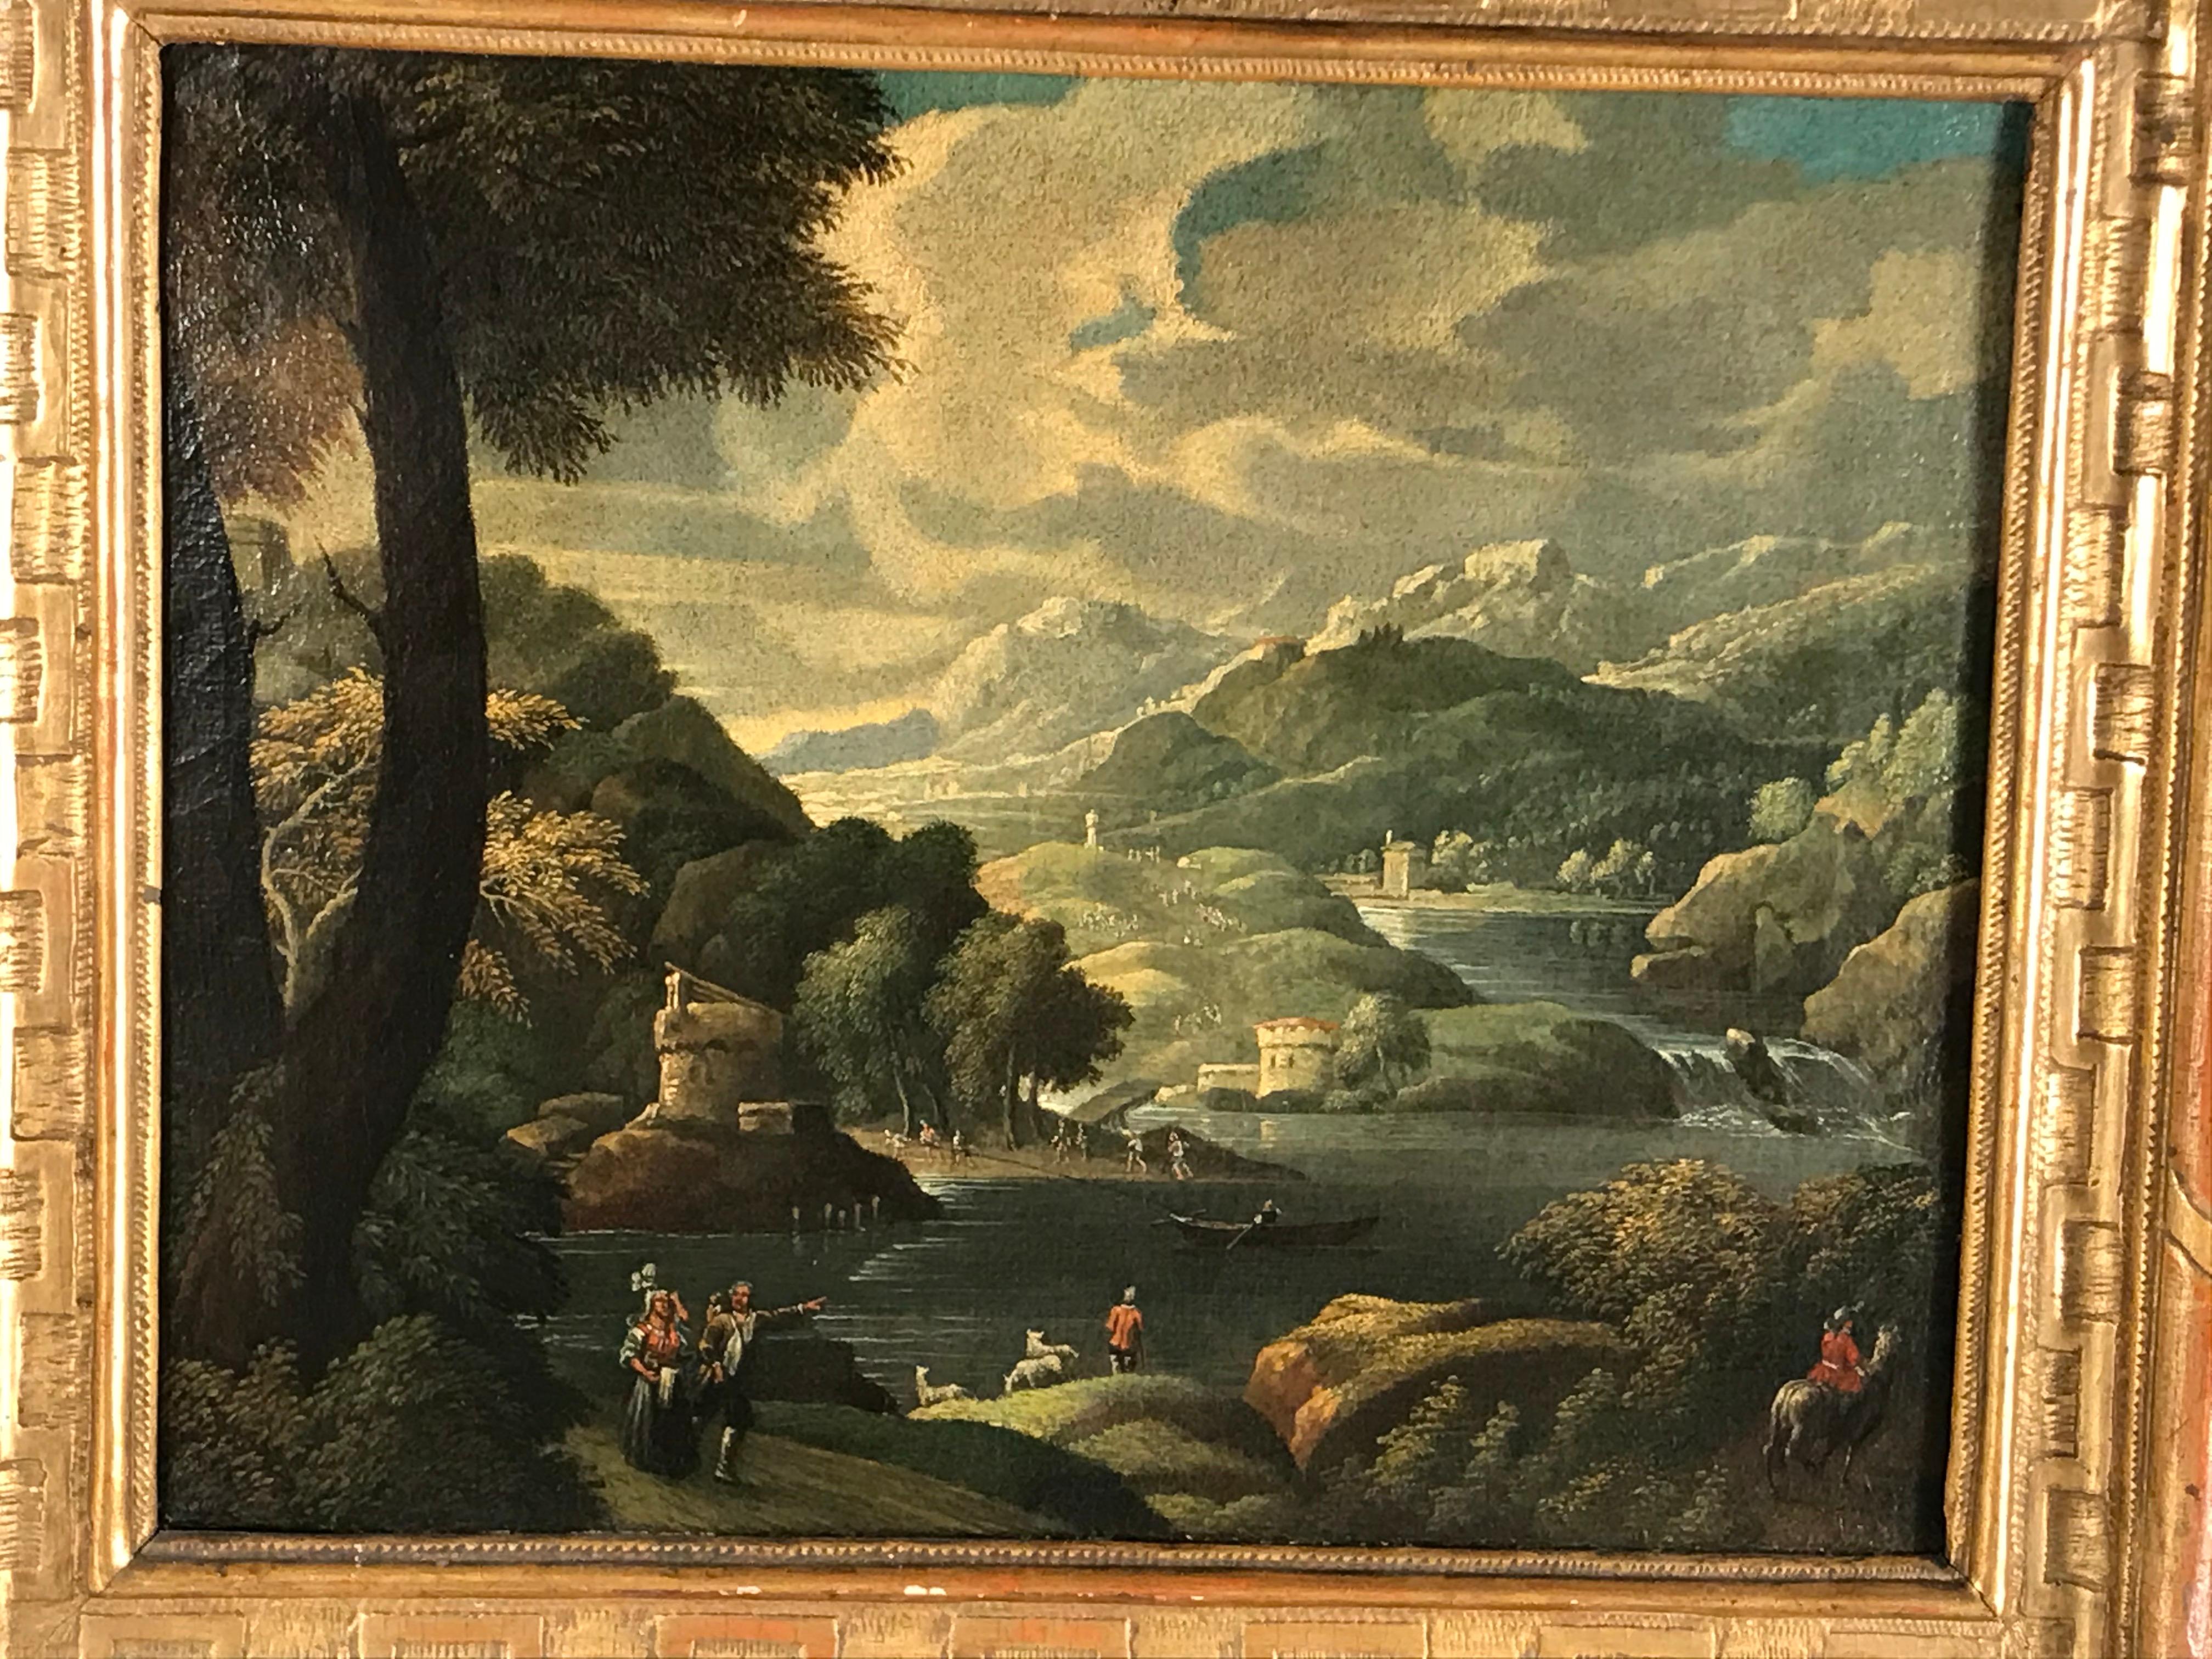 Old Master Landscape Painting, Flemish or German School 17th-18th century
Transport yourself back in time with a captivating old master landscape painting that embodies the essence of the 17th to 18th-century Flemish or German School of artistry.